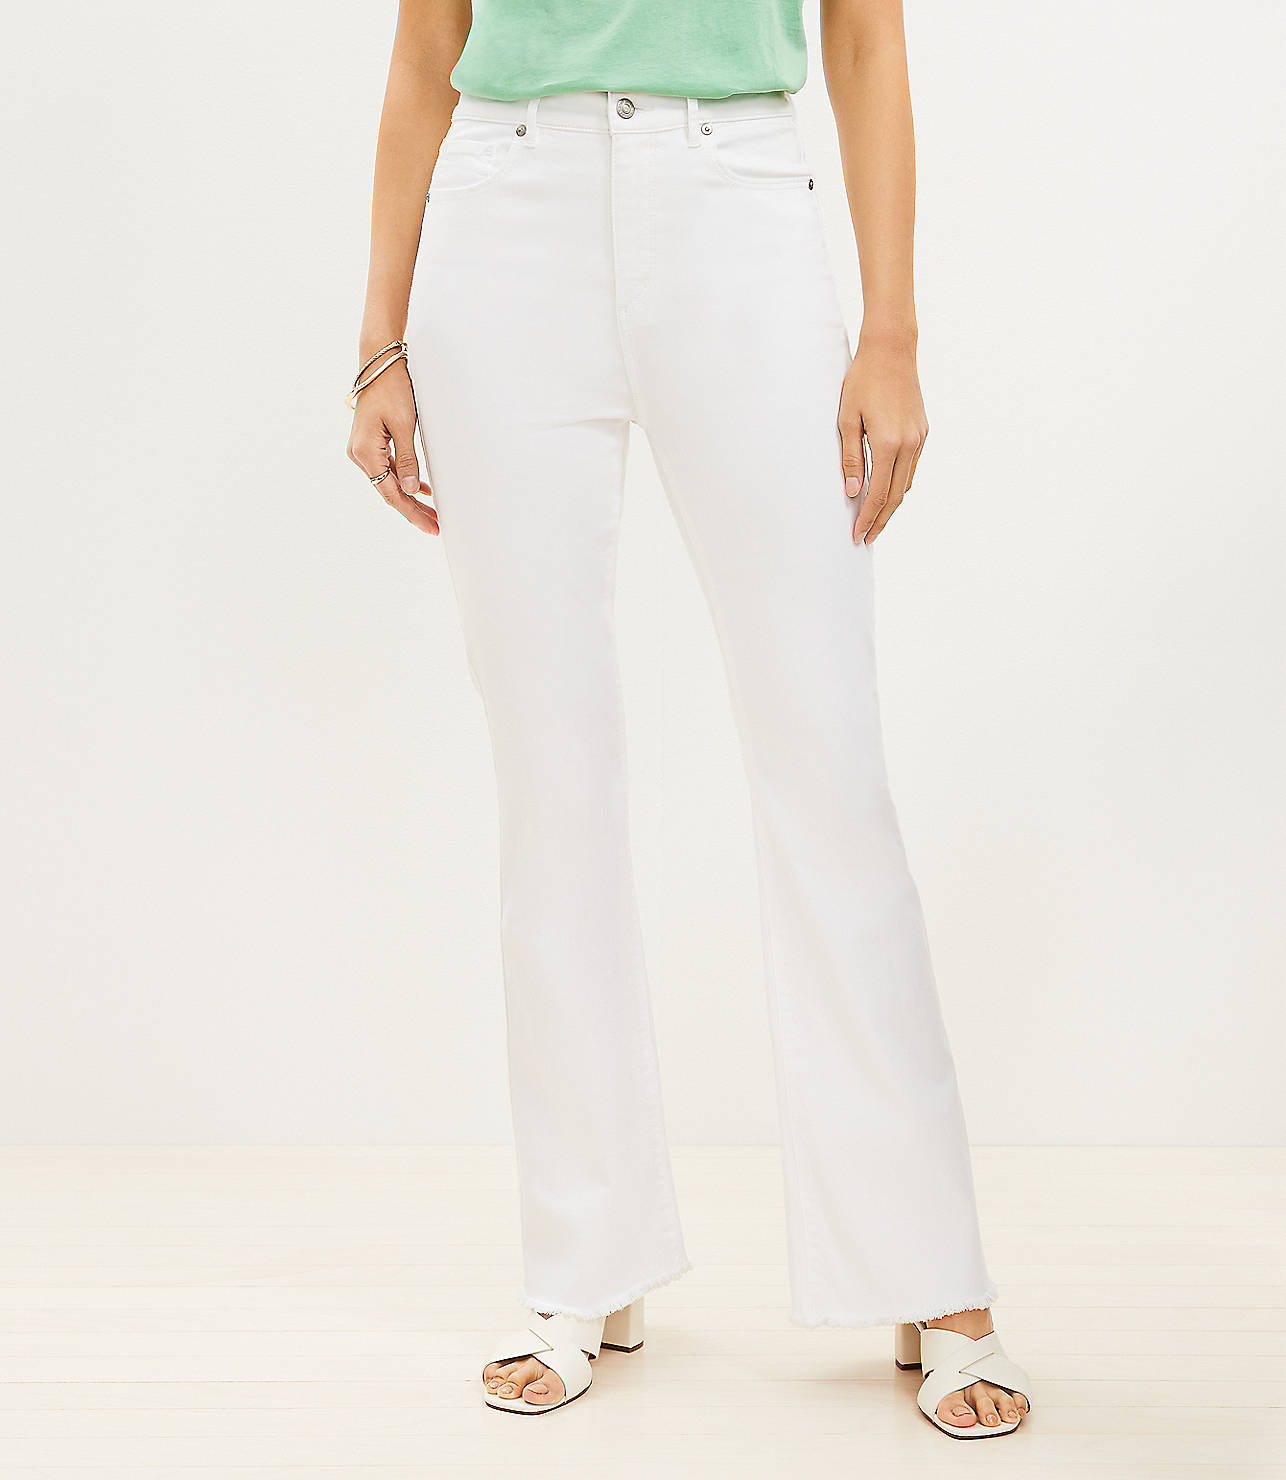 Petite Frayed High Rise Slim Flare Jeans in White